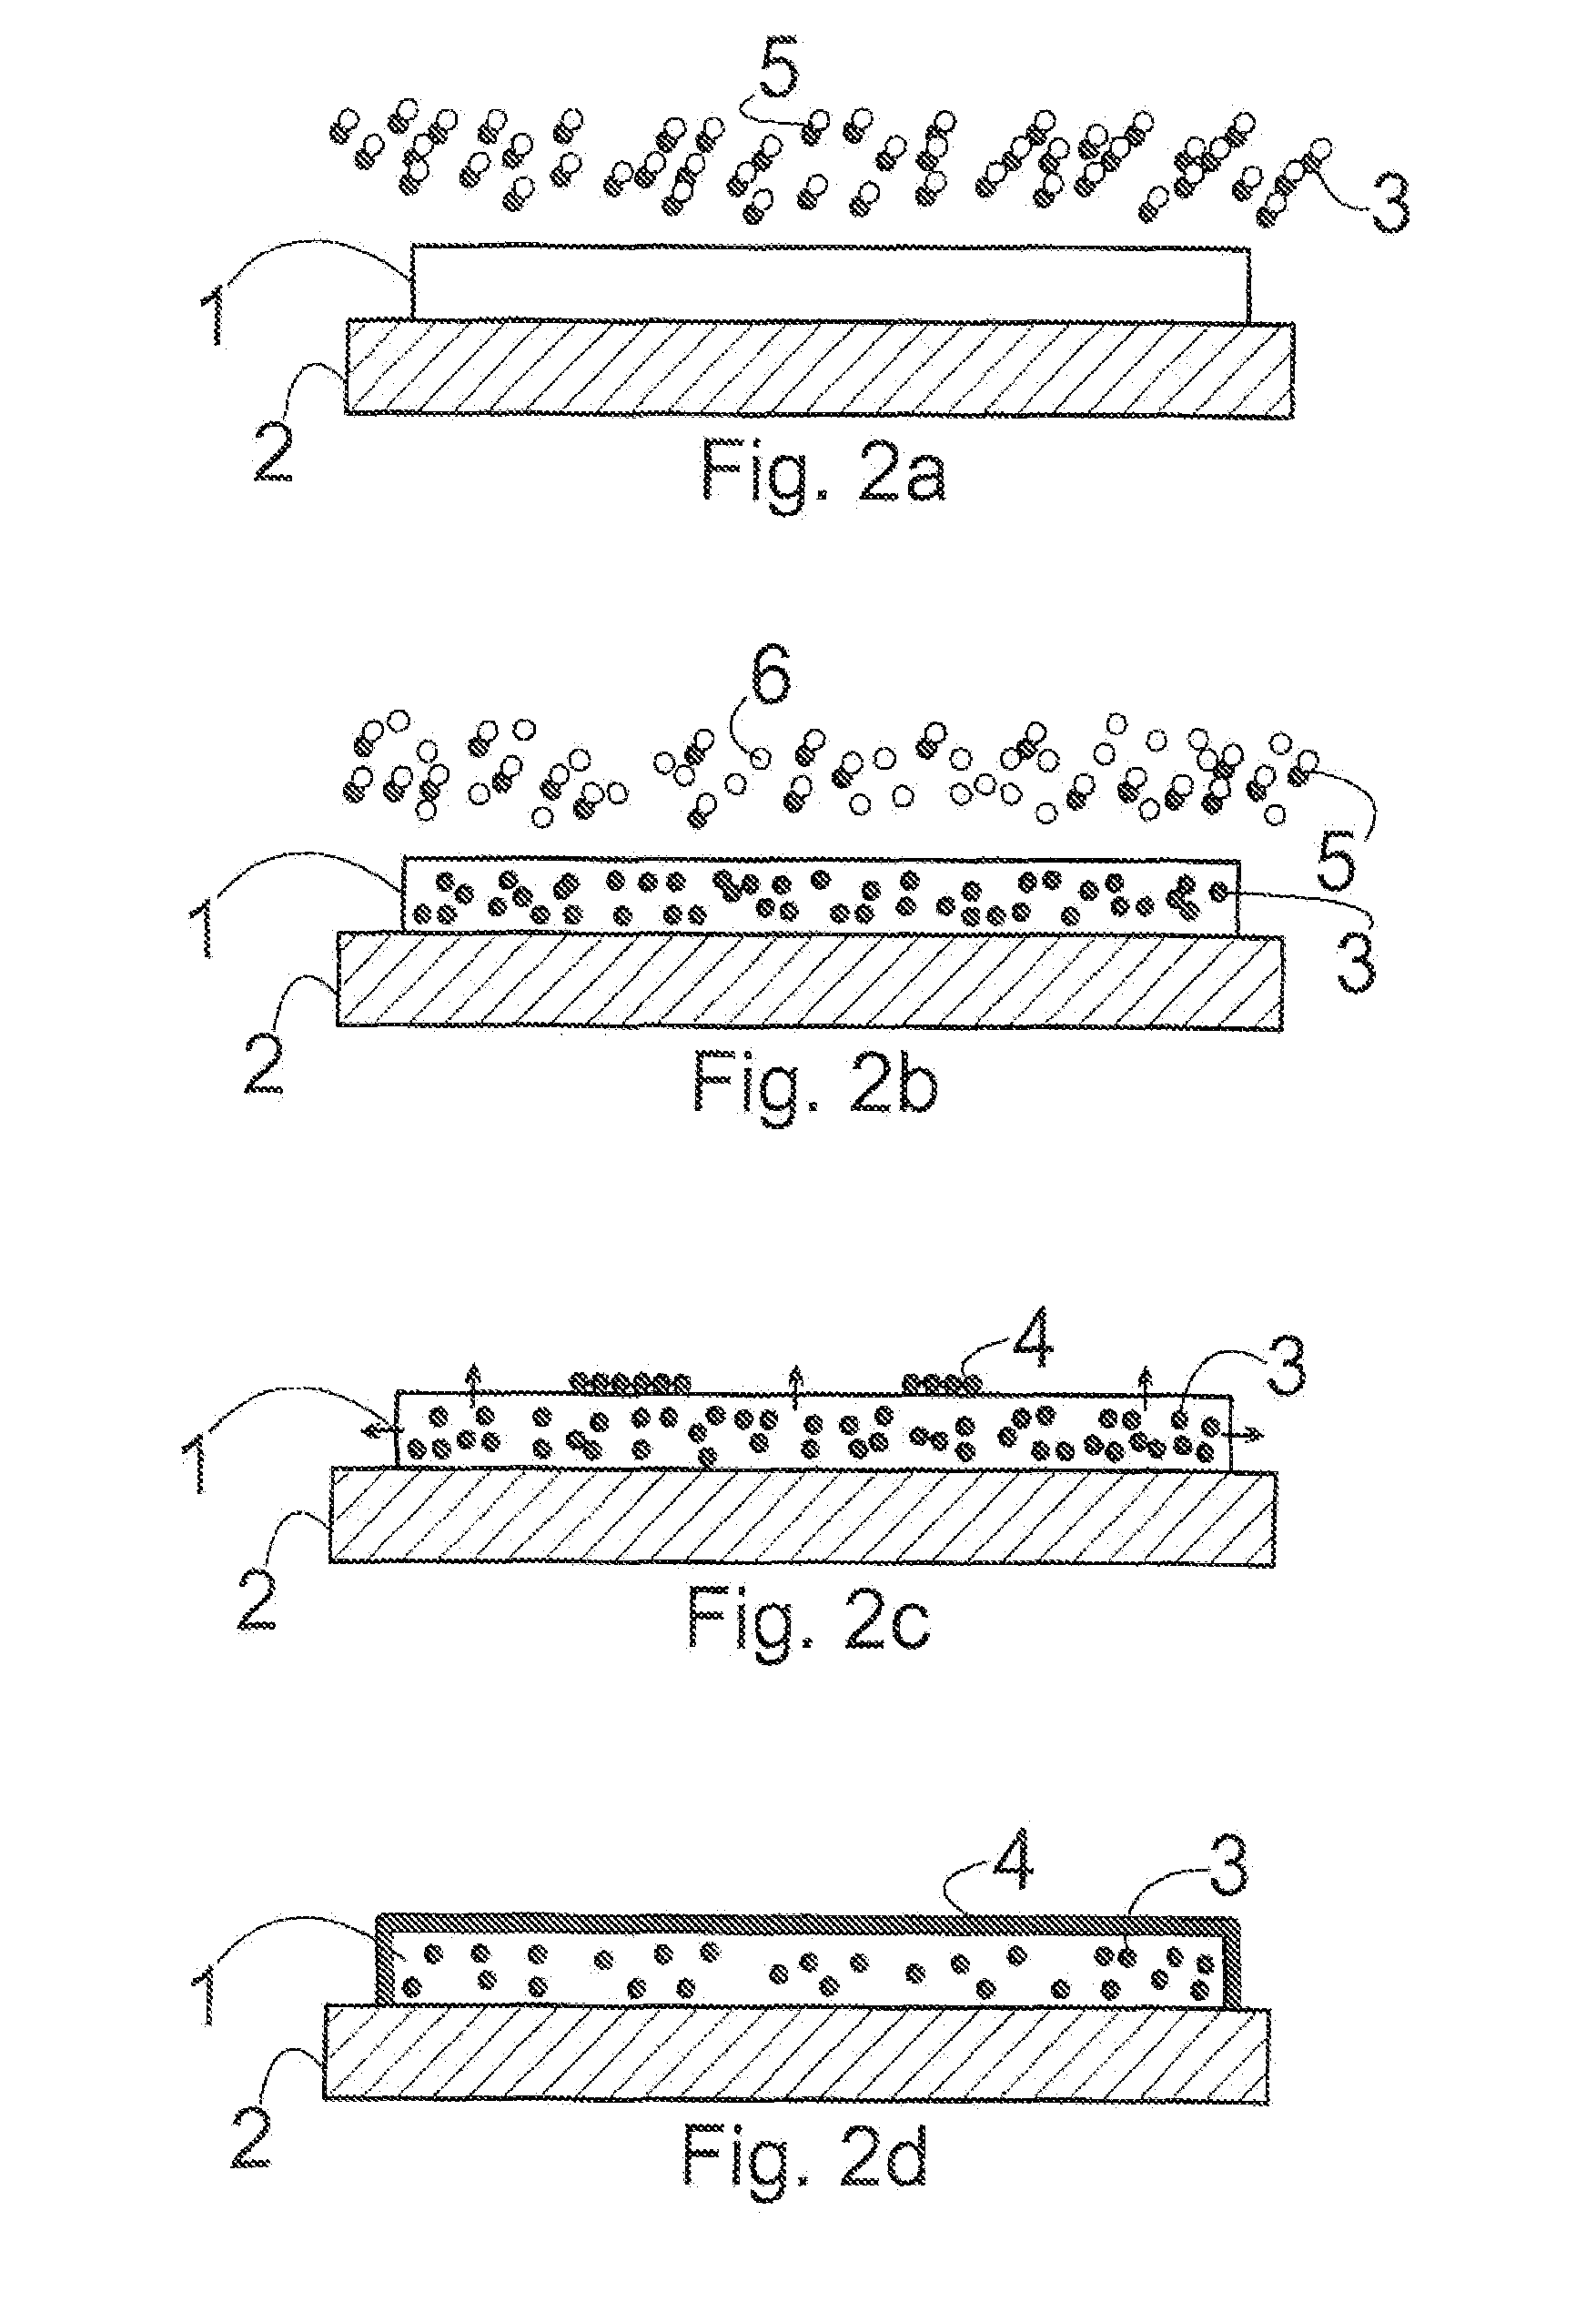 Crystalline surface structures and methods for their fabrication